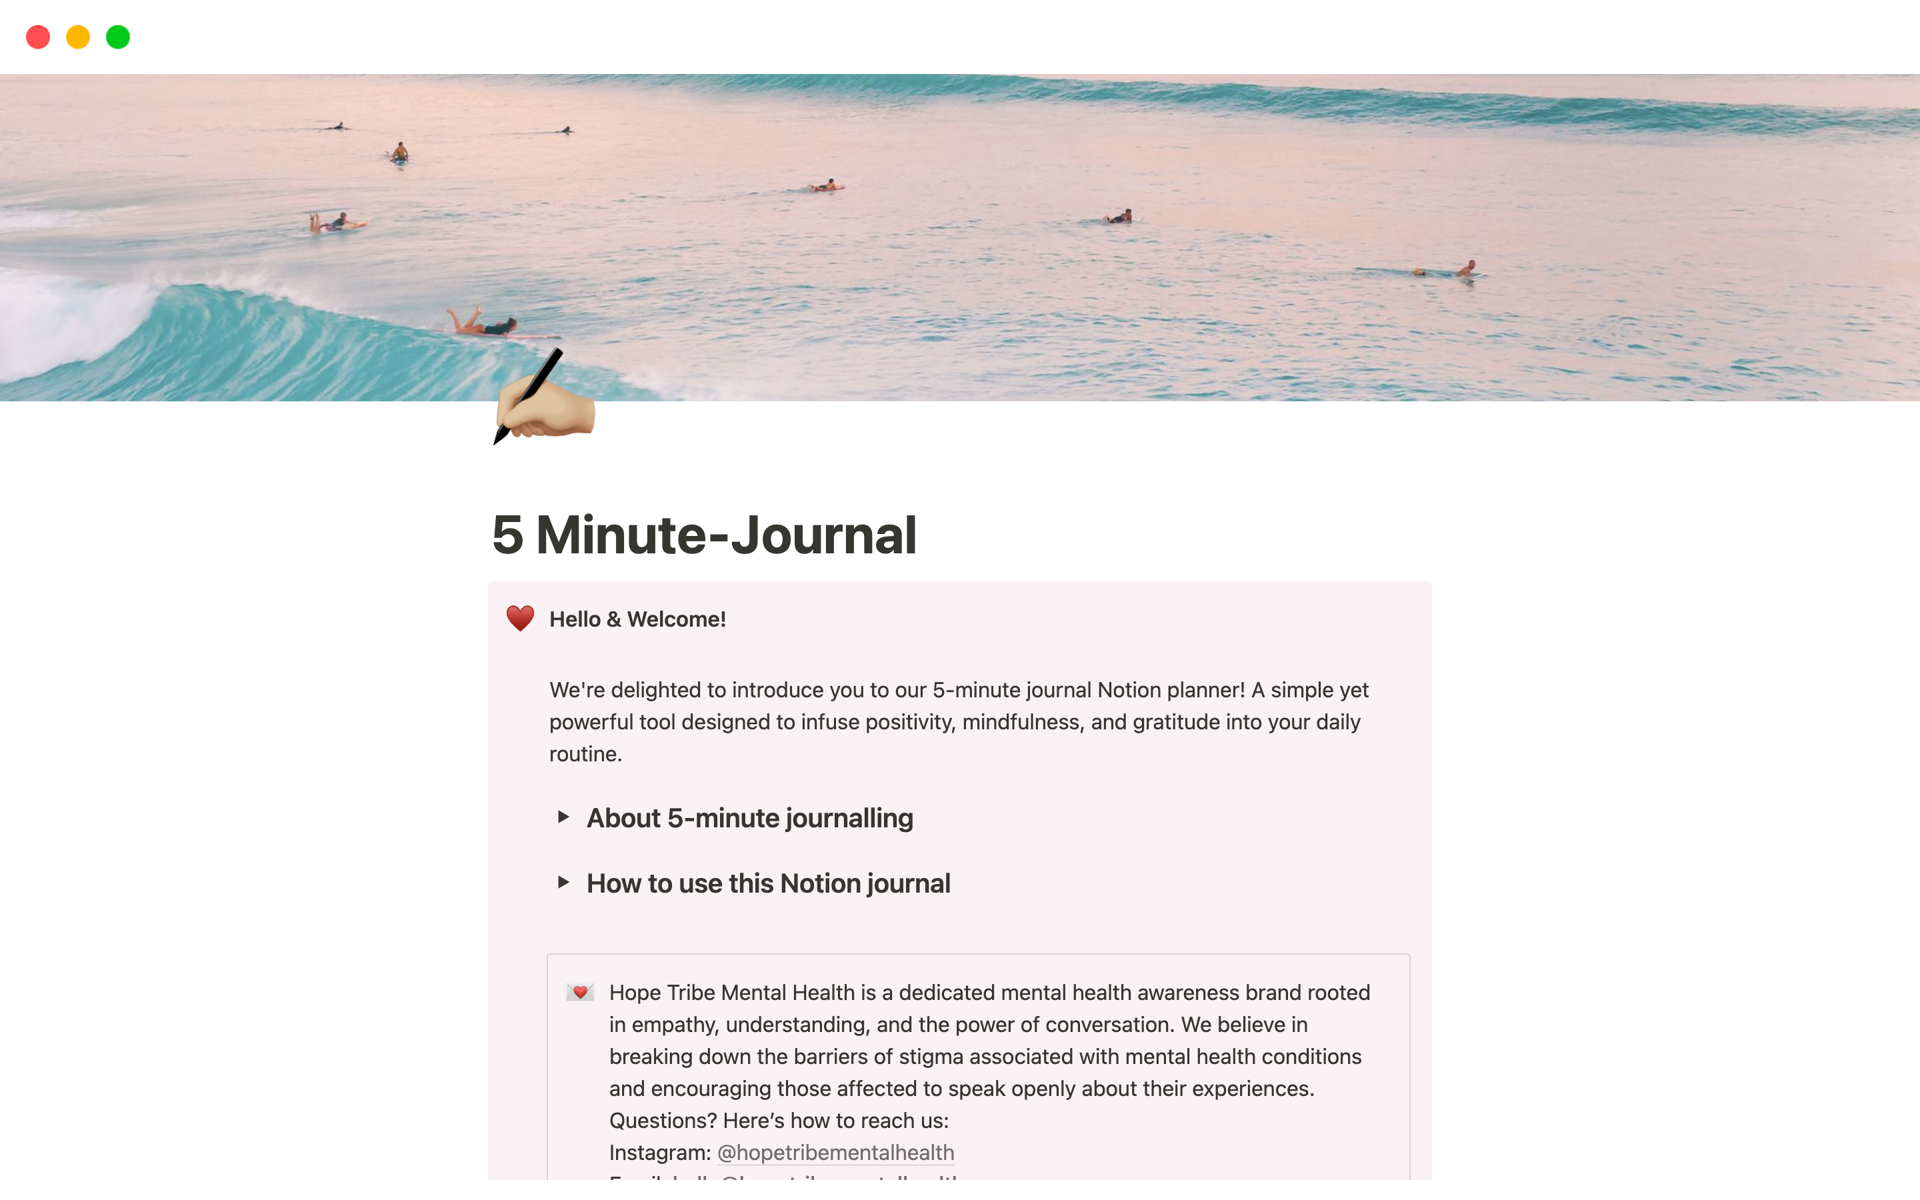 Discover the power of expressive writing with our Notion 5-Minute Journal.
